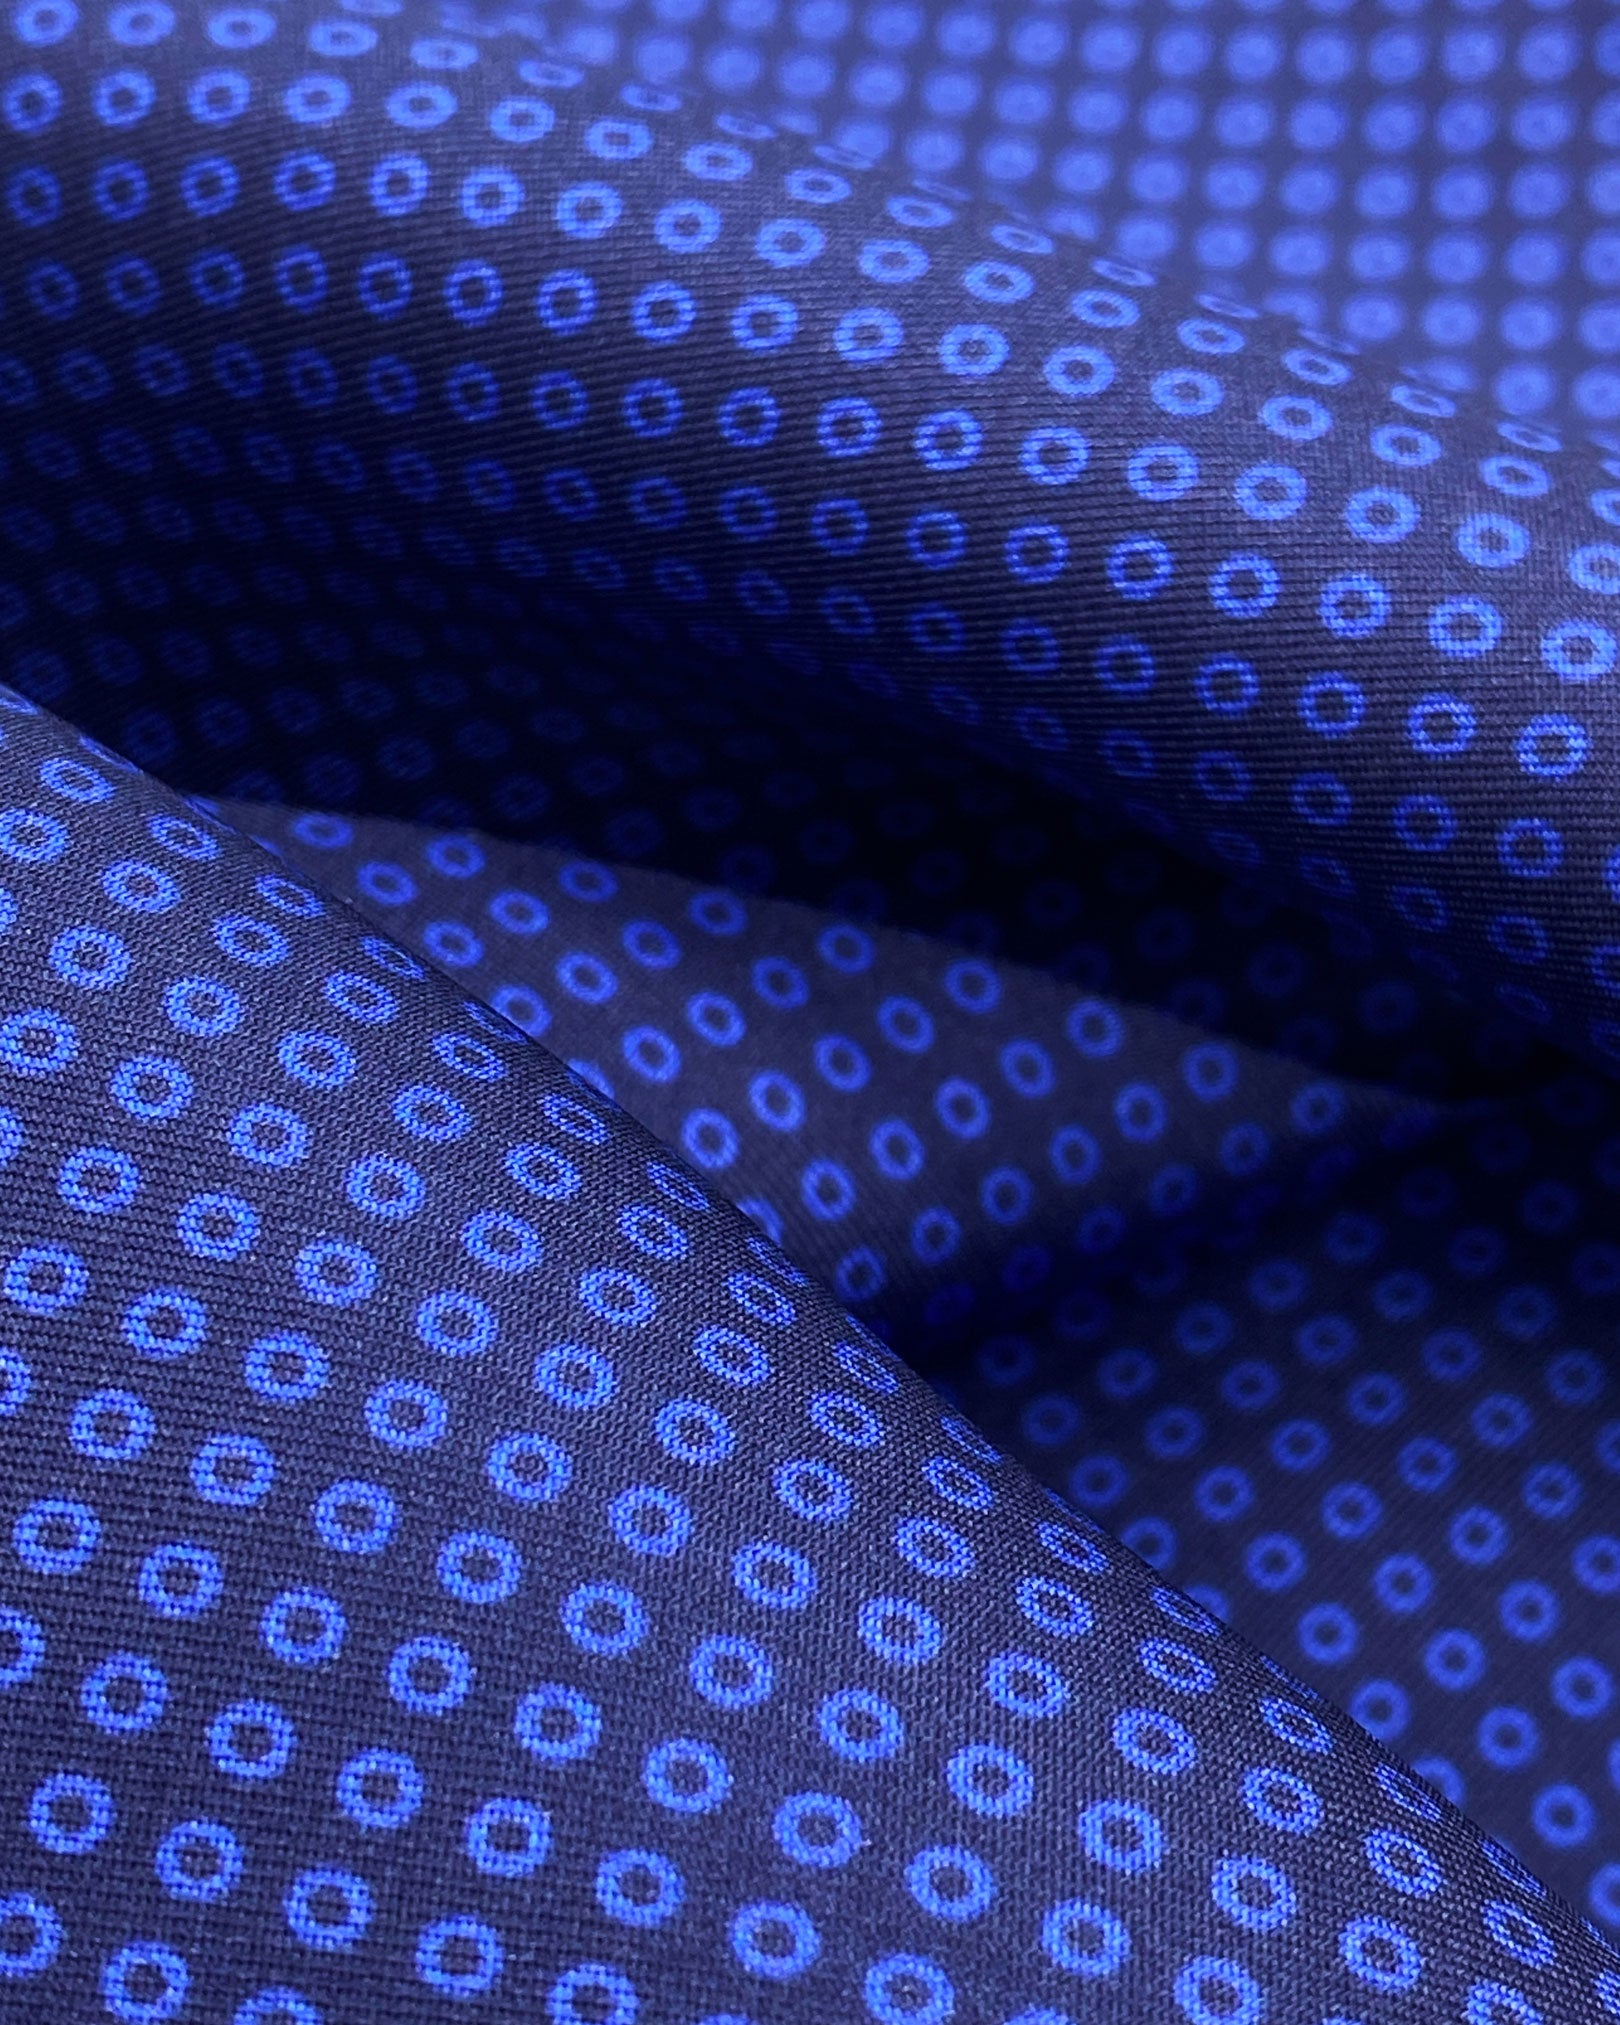 A ruffled close-up of the 'Nakano' silk scarf, presenting a closer view of the geometric small pale blue circles against the deep blue background.